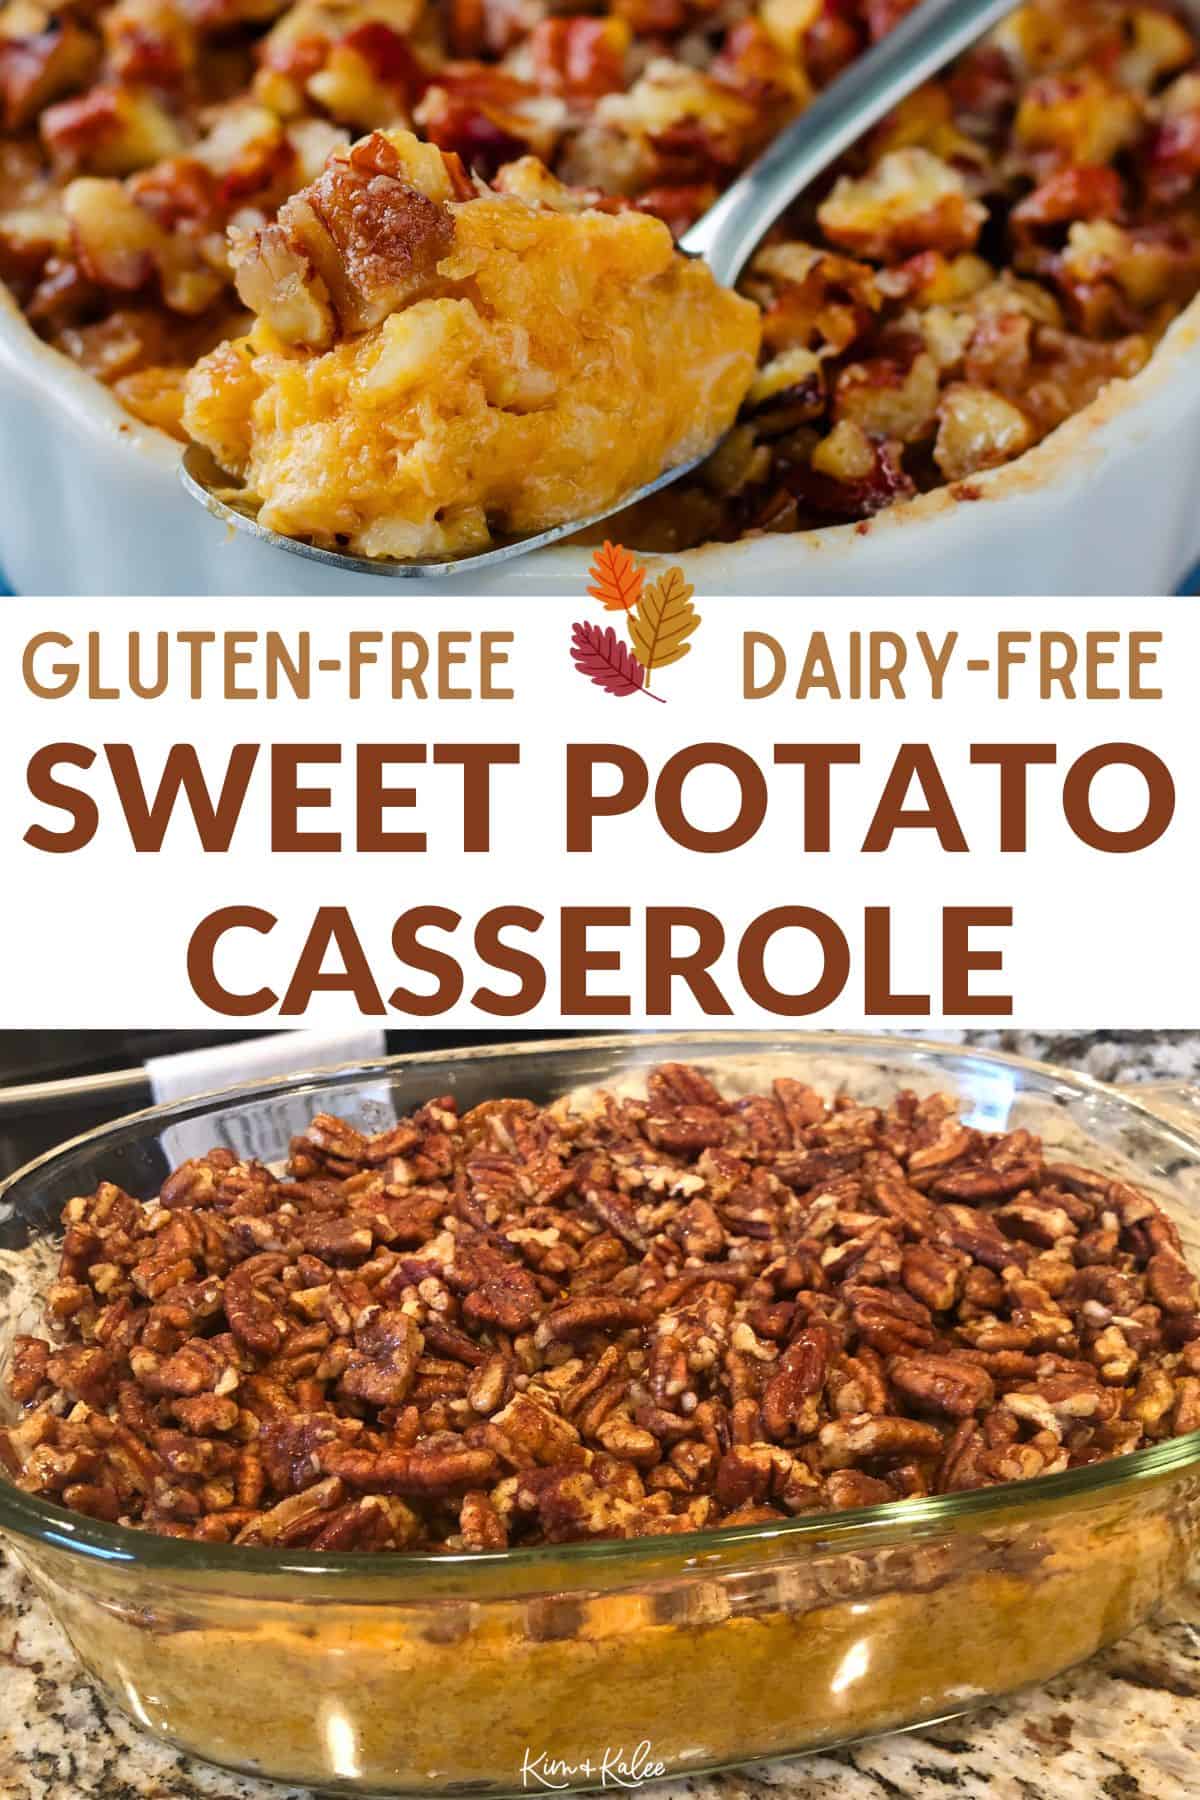 collage of a close up bite of the recipe and the dish in a casserole dish - text overlay in the middle says Gluten-Free Dairy-Free Sweet Potato Casserole